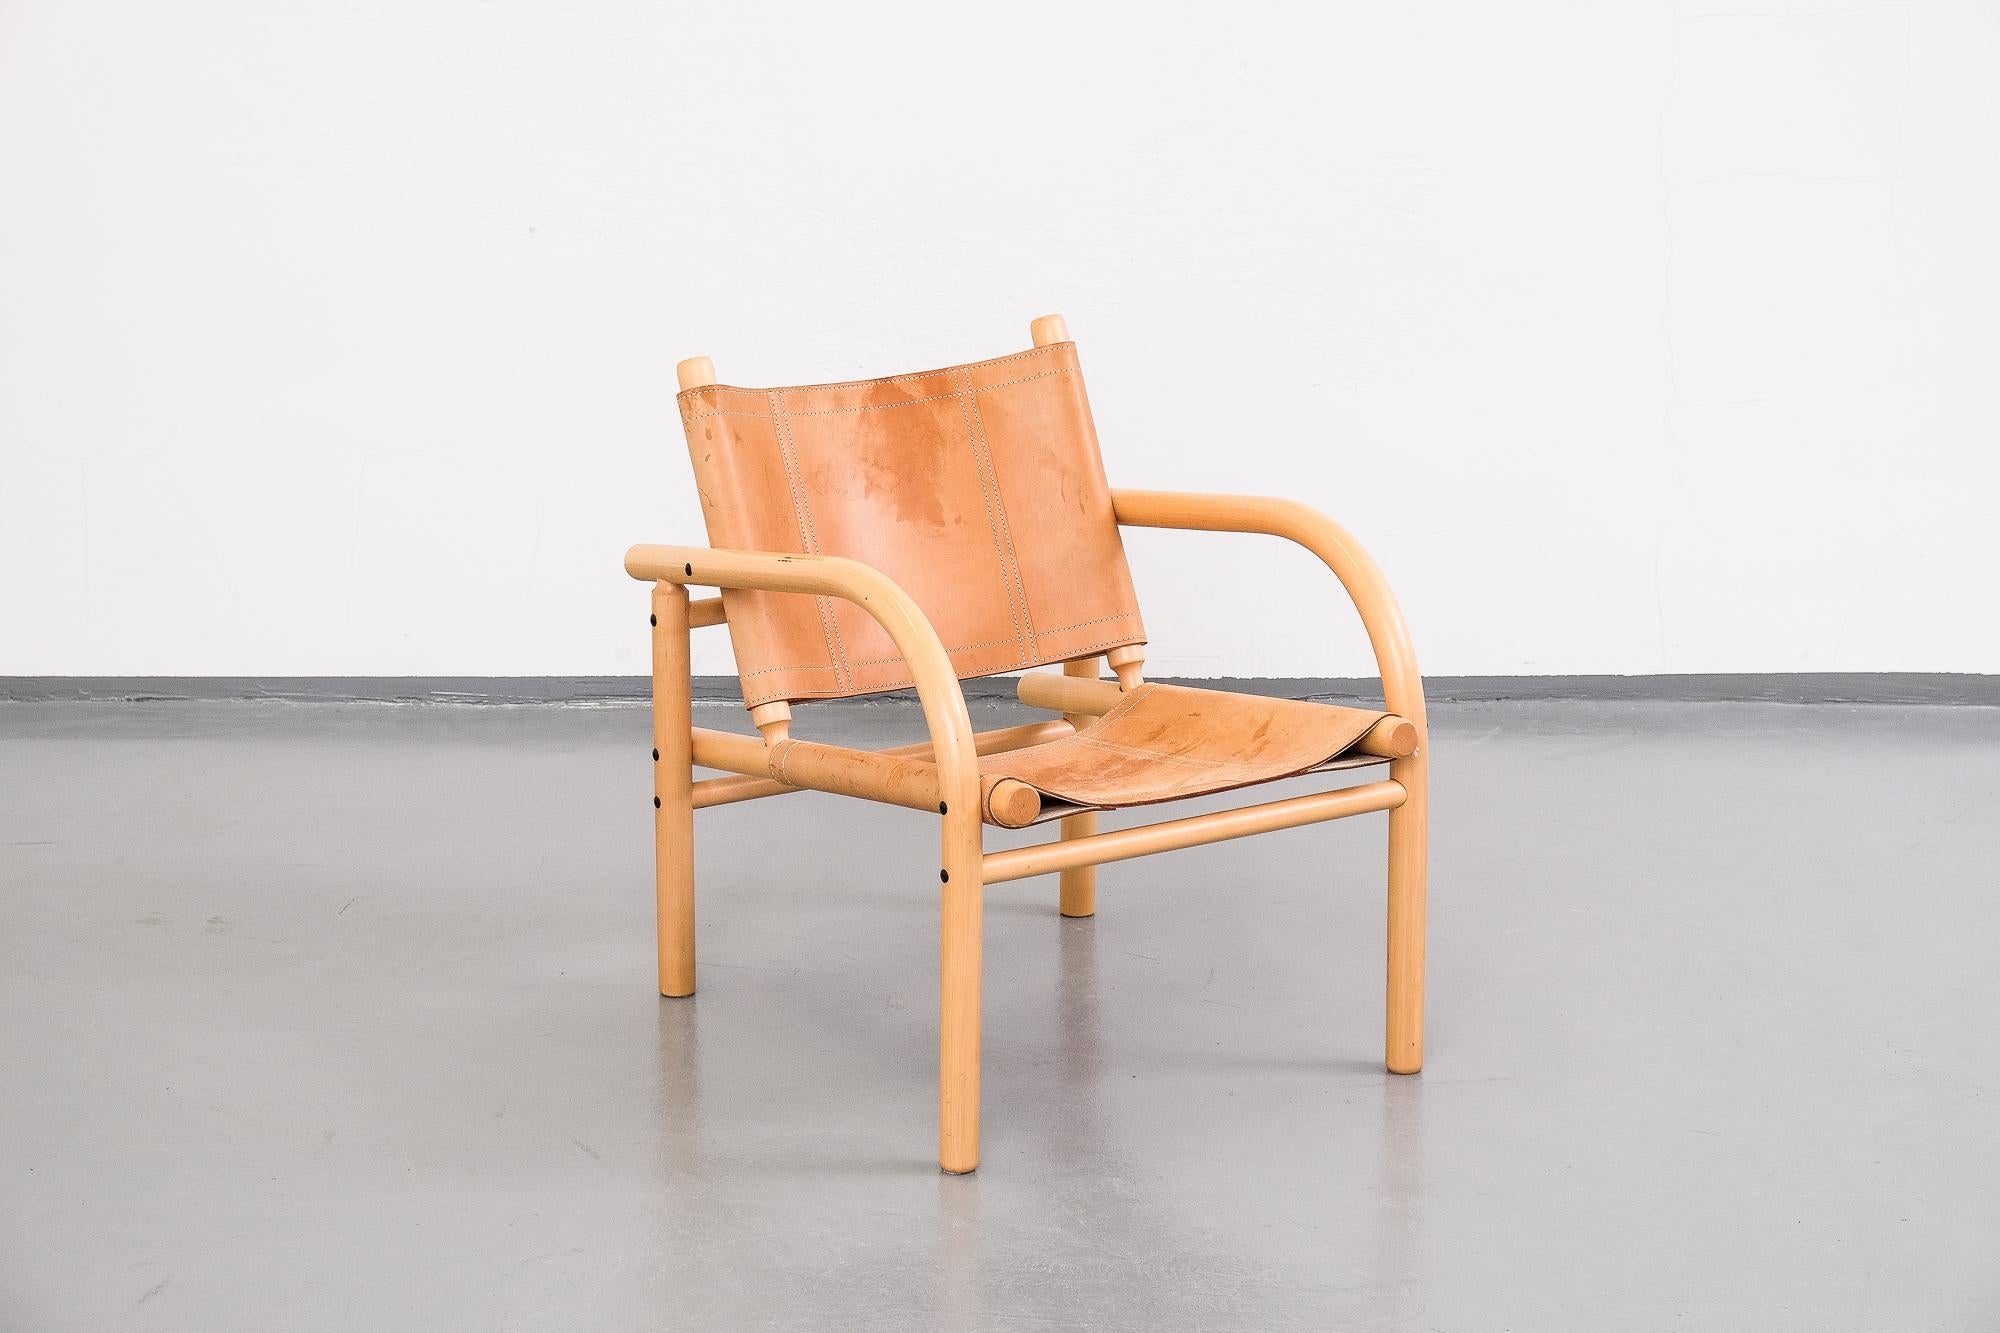 Classic safari chair from Finland designed in 1974 by Ben af Schultén for Artek. Birch frame with seat and back in patinated natural leather. This is the bigger lounge chair model.

         